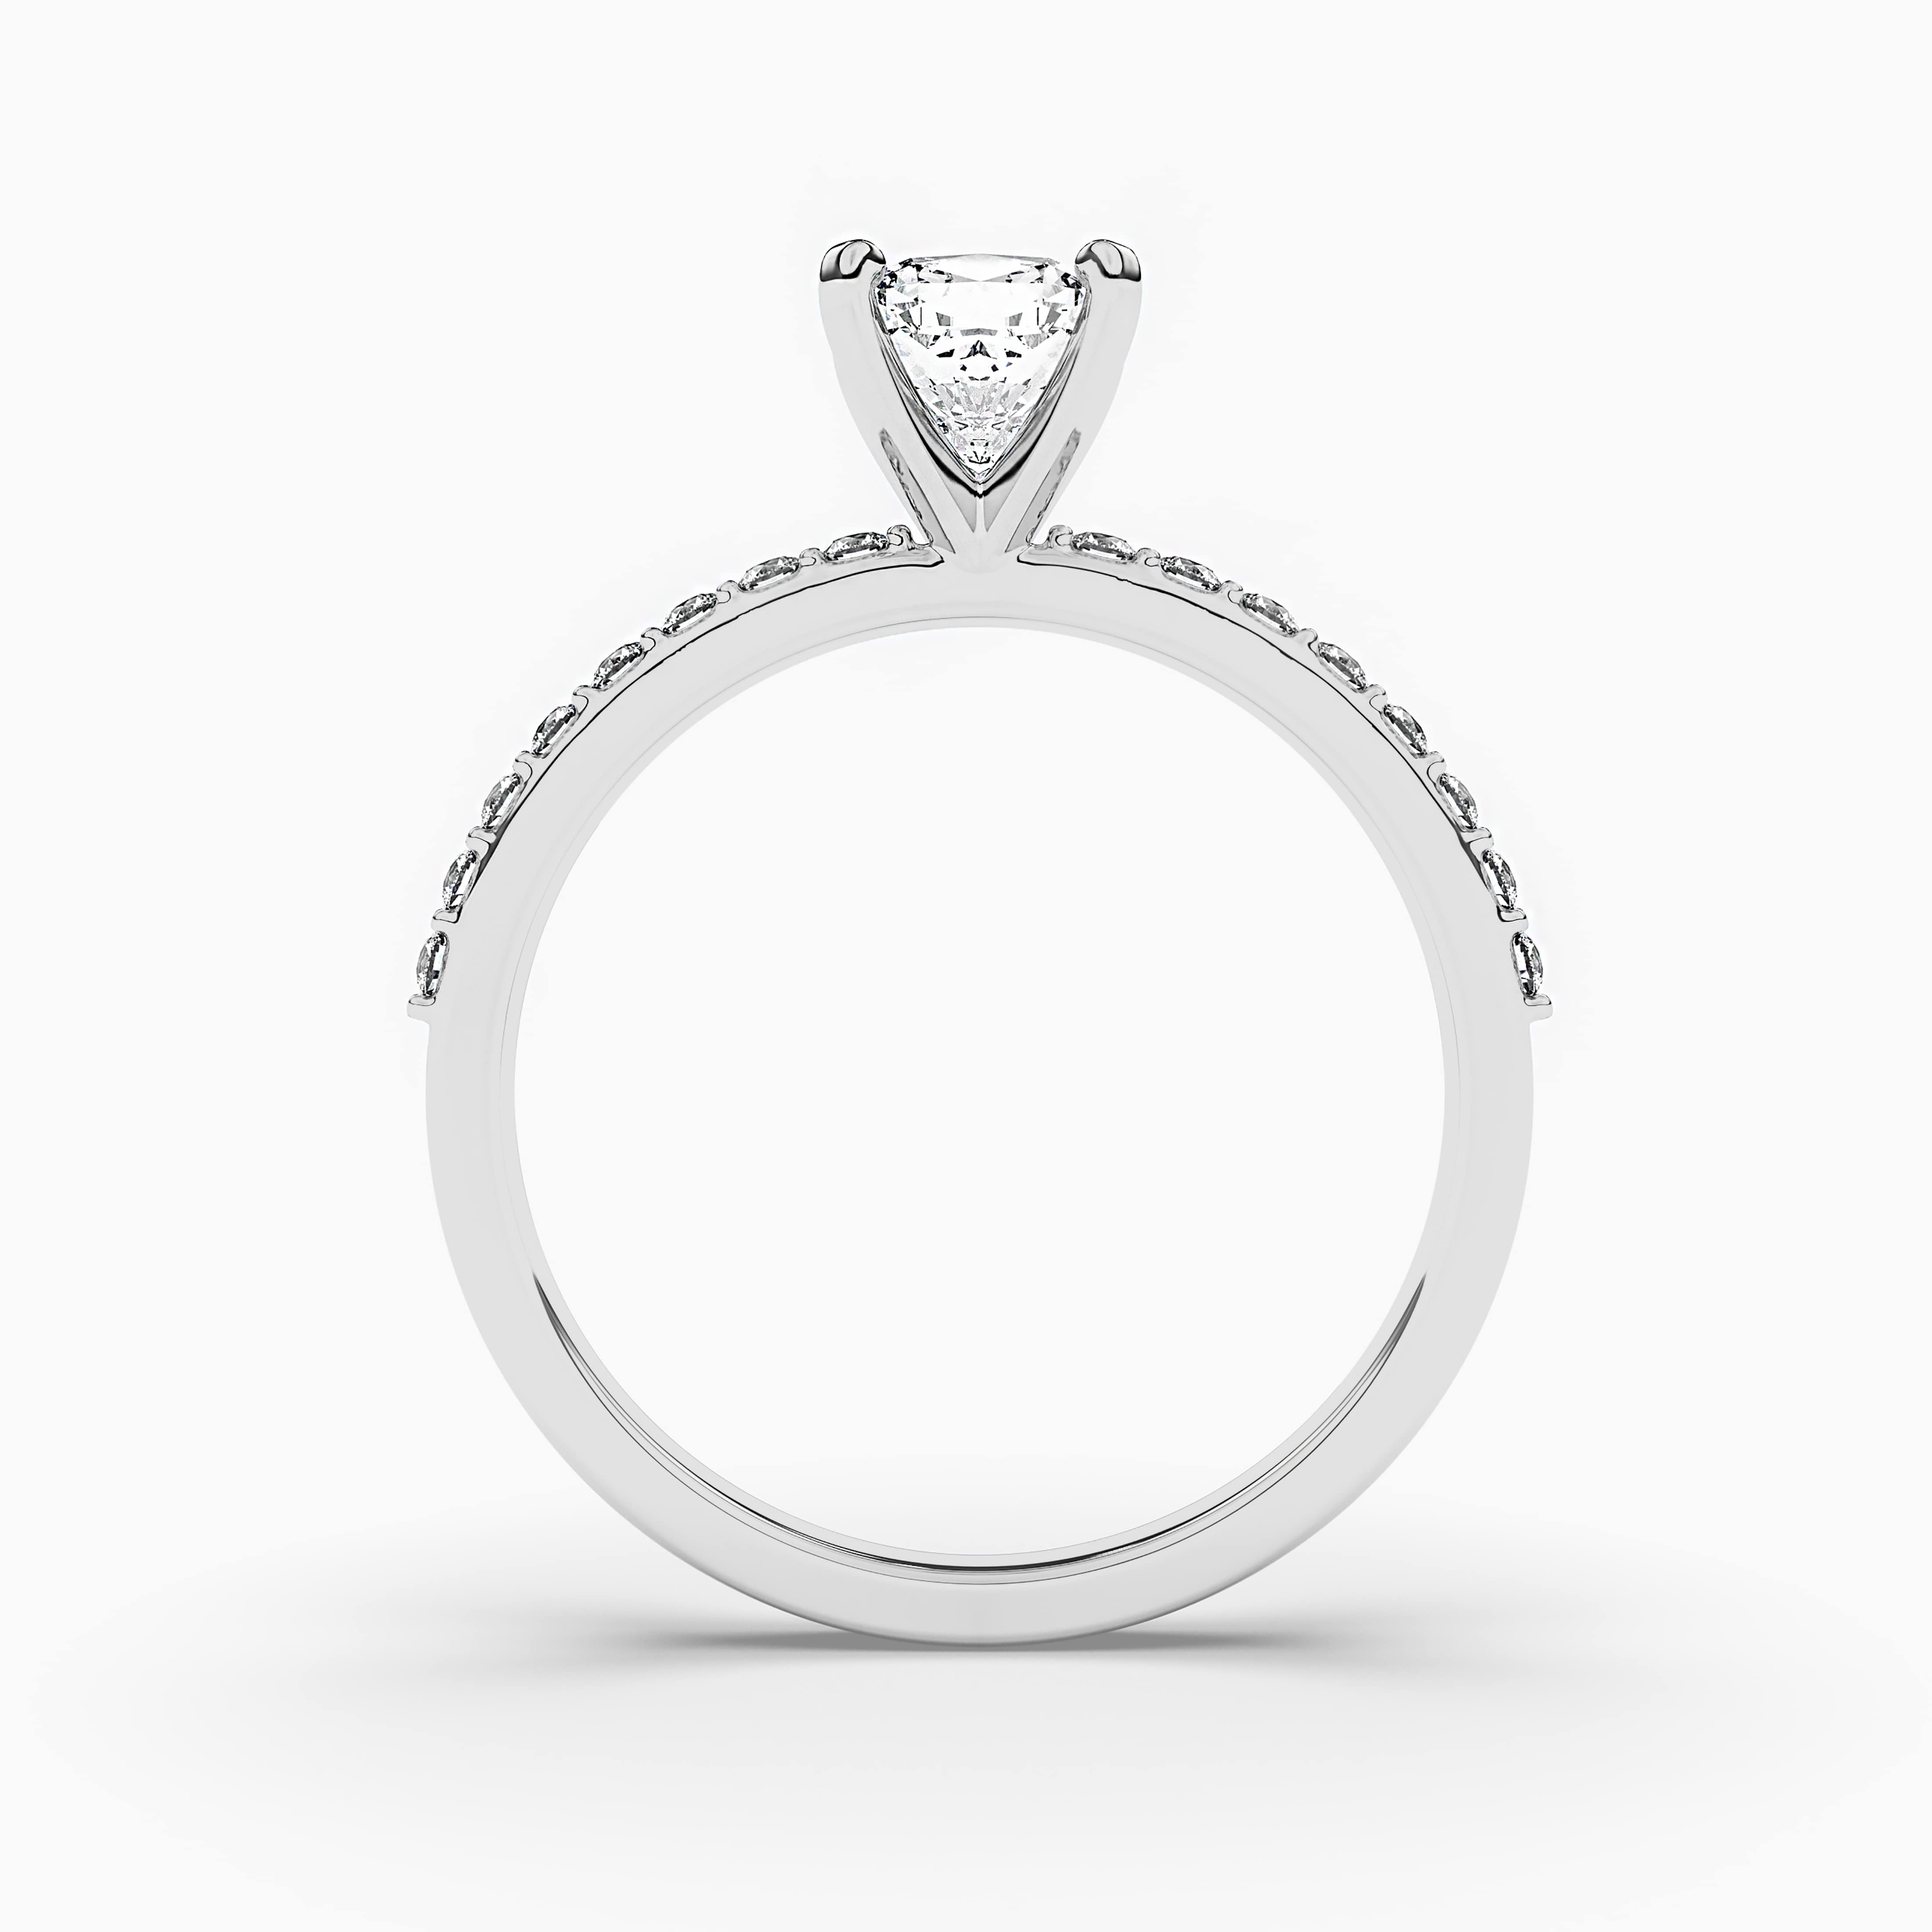 Cushion Cut Diamond Engagement Ring With Side Stones